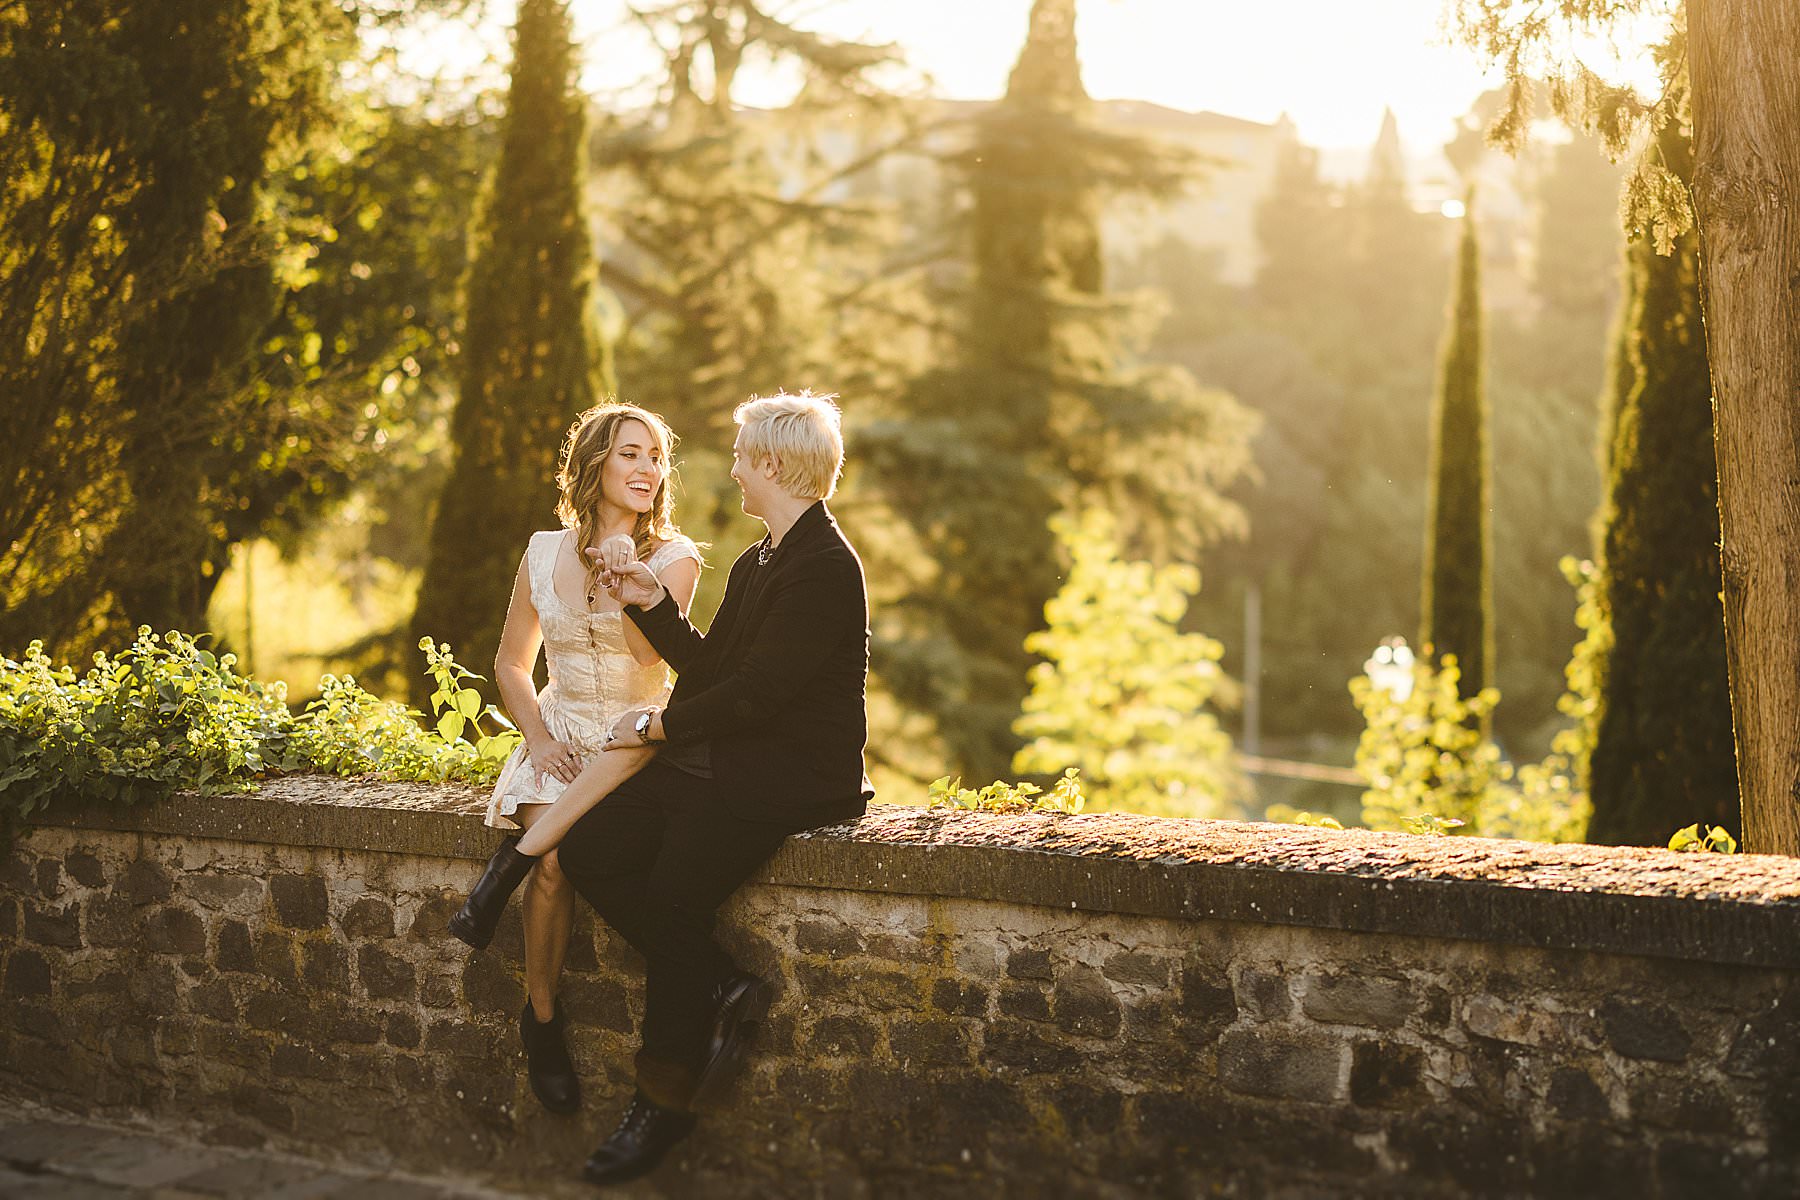 Sweet and beautiful couple engagement photo session in Florence, Italy